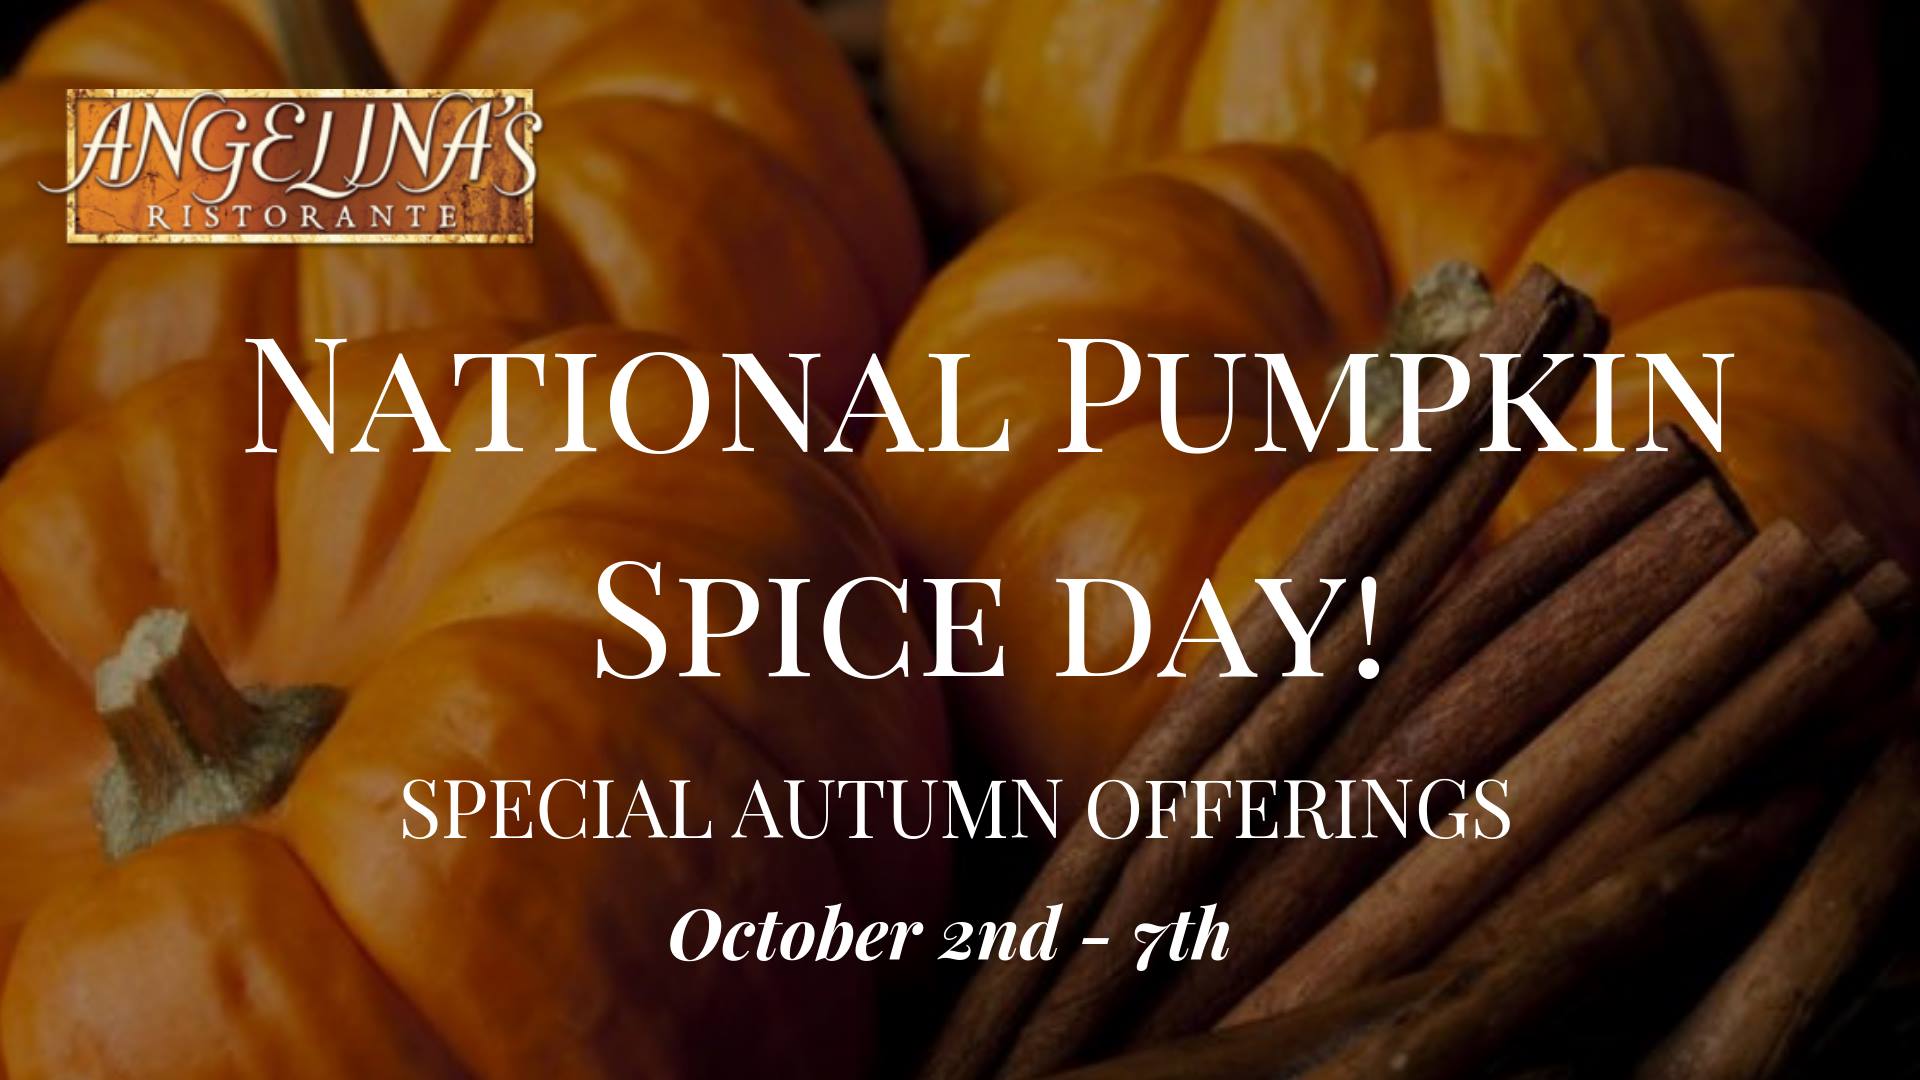 Celebrate National Pumpkin Spice Day at Angelina's!